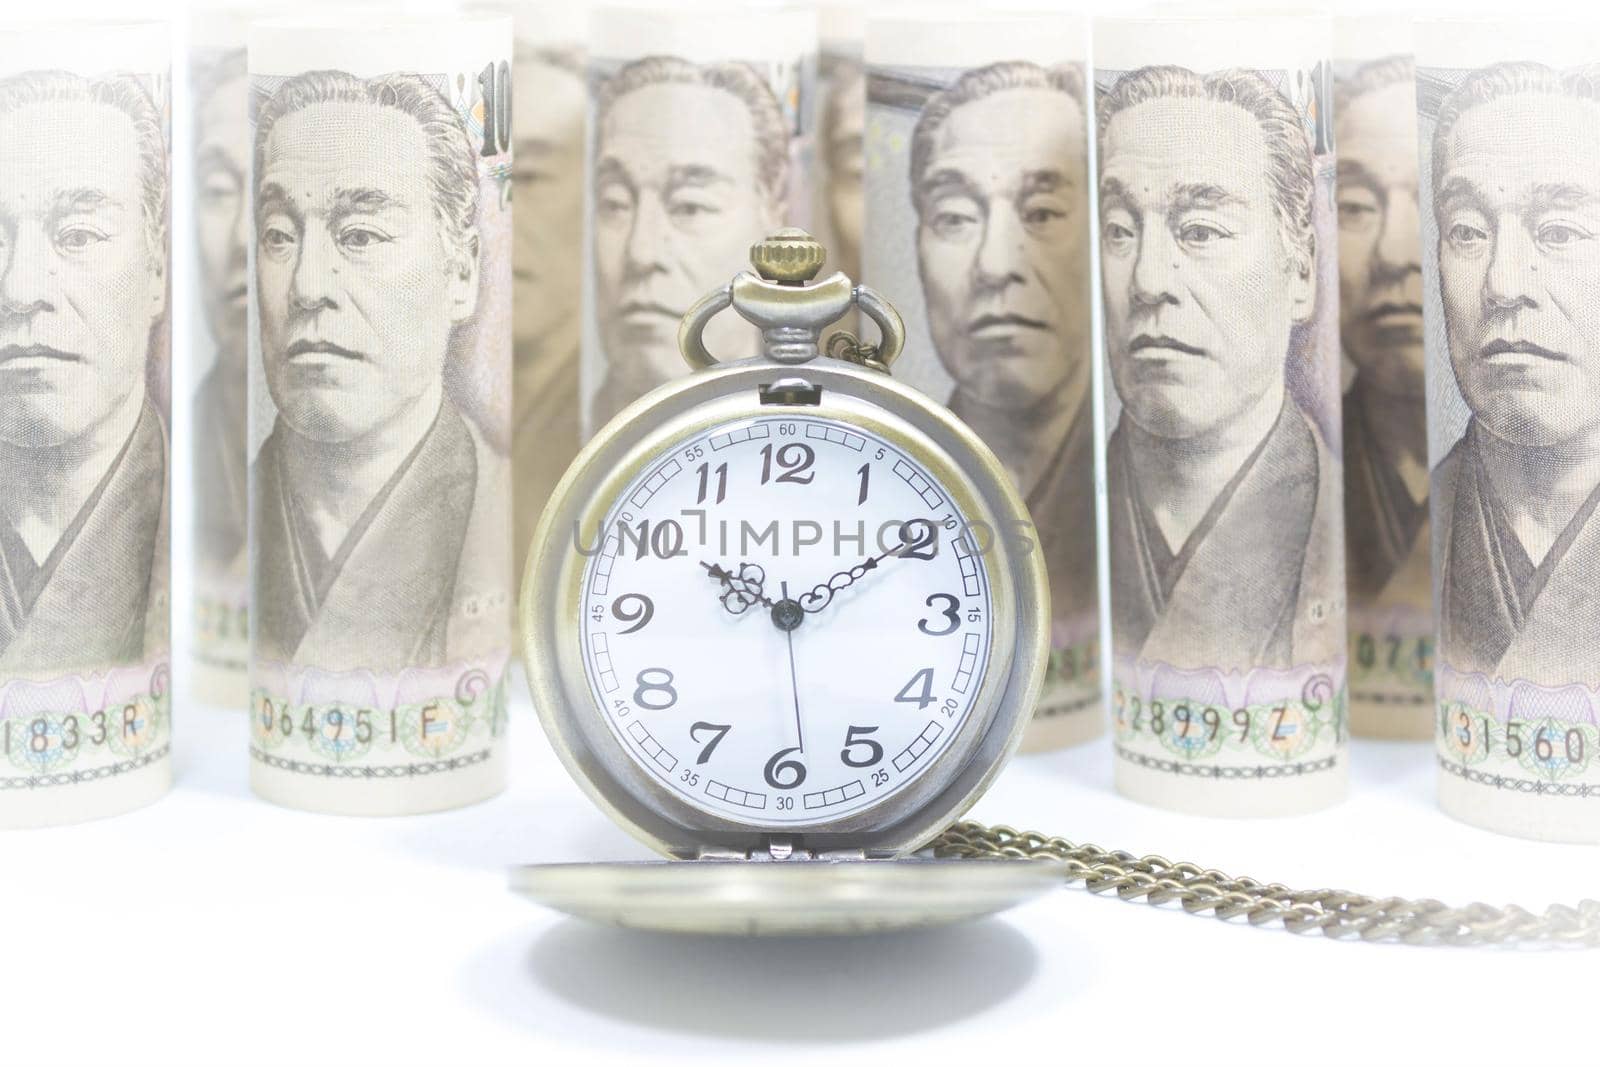 Classic Pocket Watch On Dollar Banknote, Concept And Idea Of Time Value And Money, Business And Finance Concepts. by rakoptonLPN